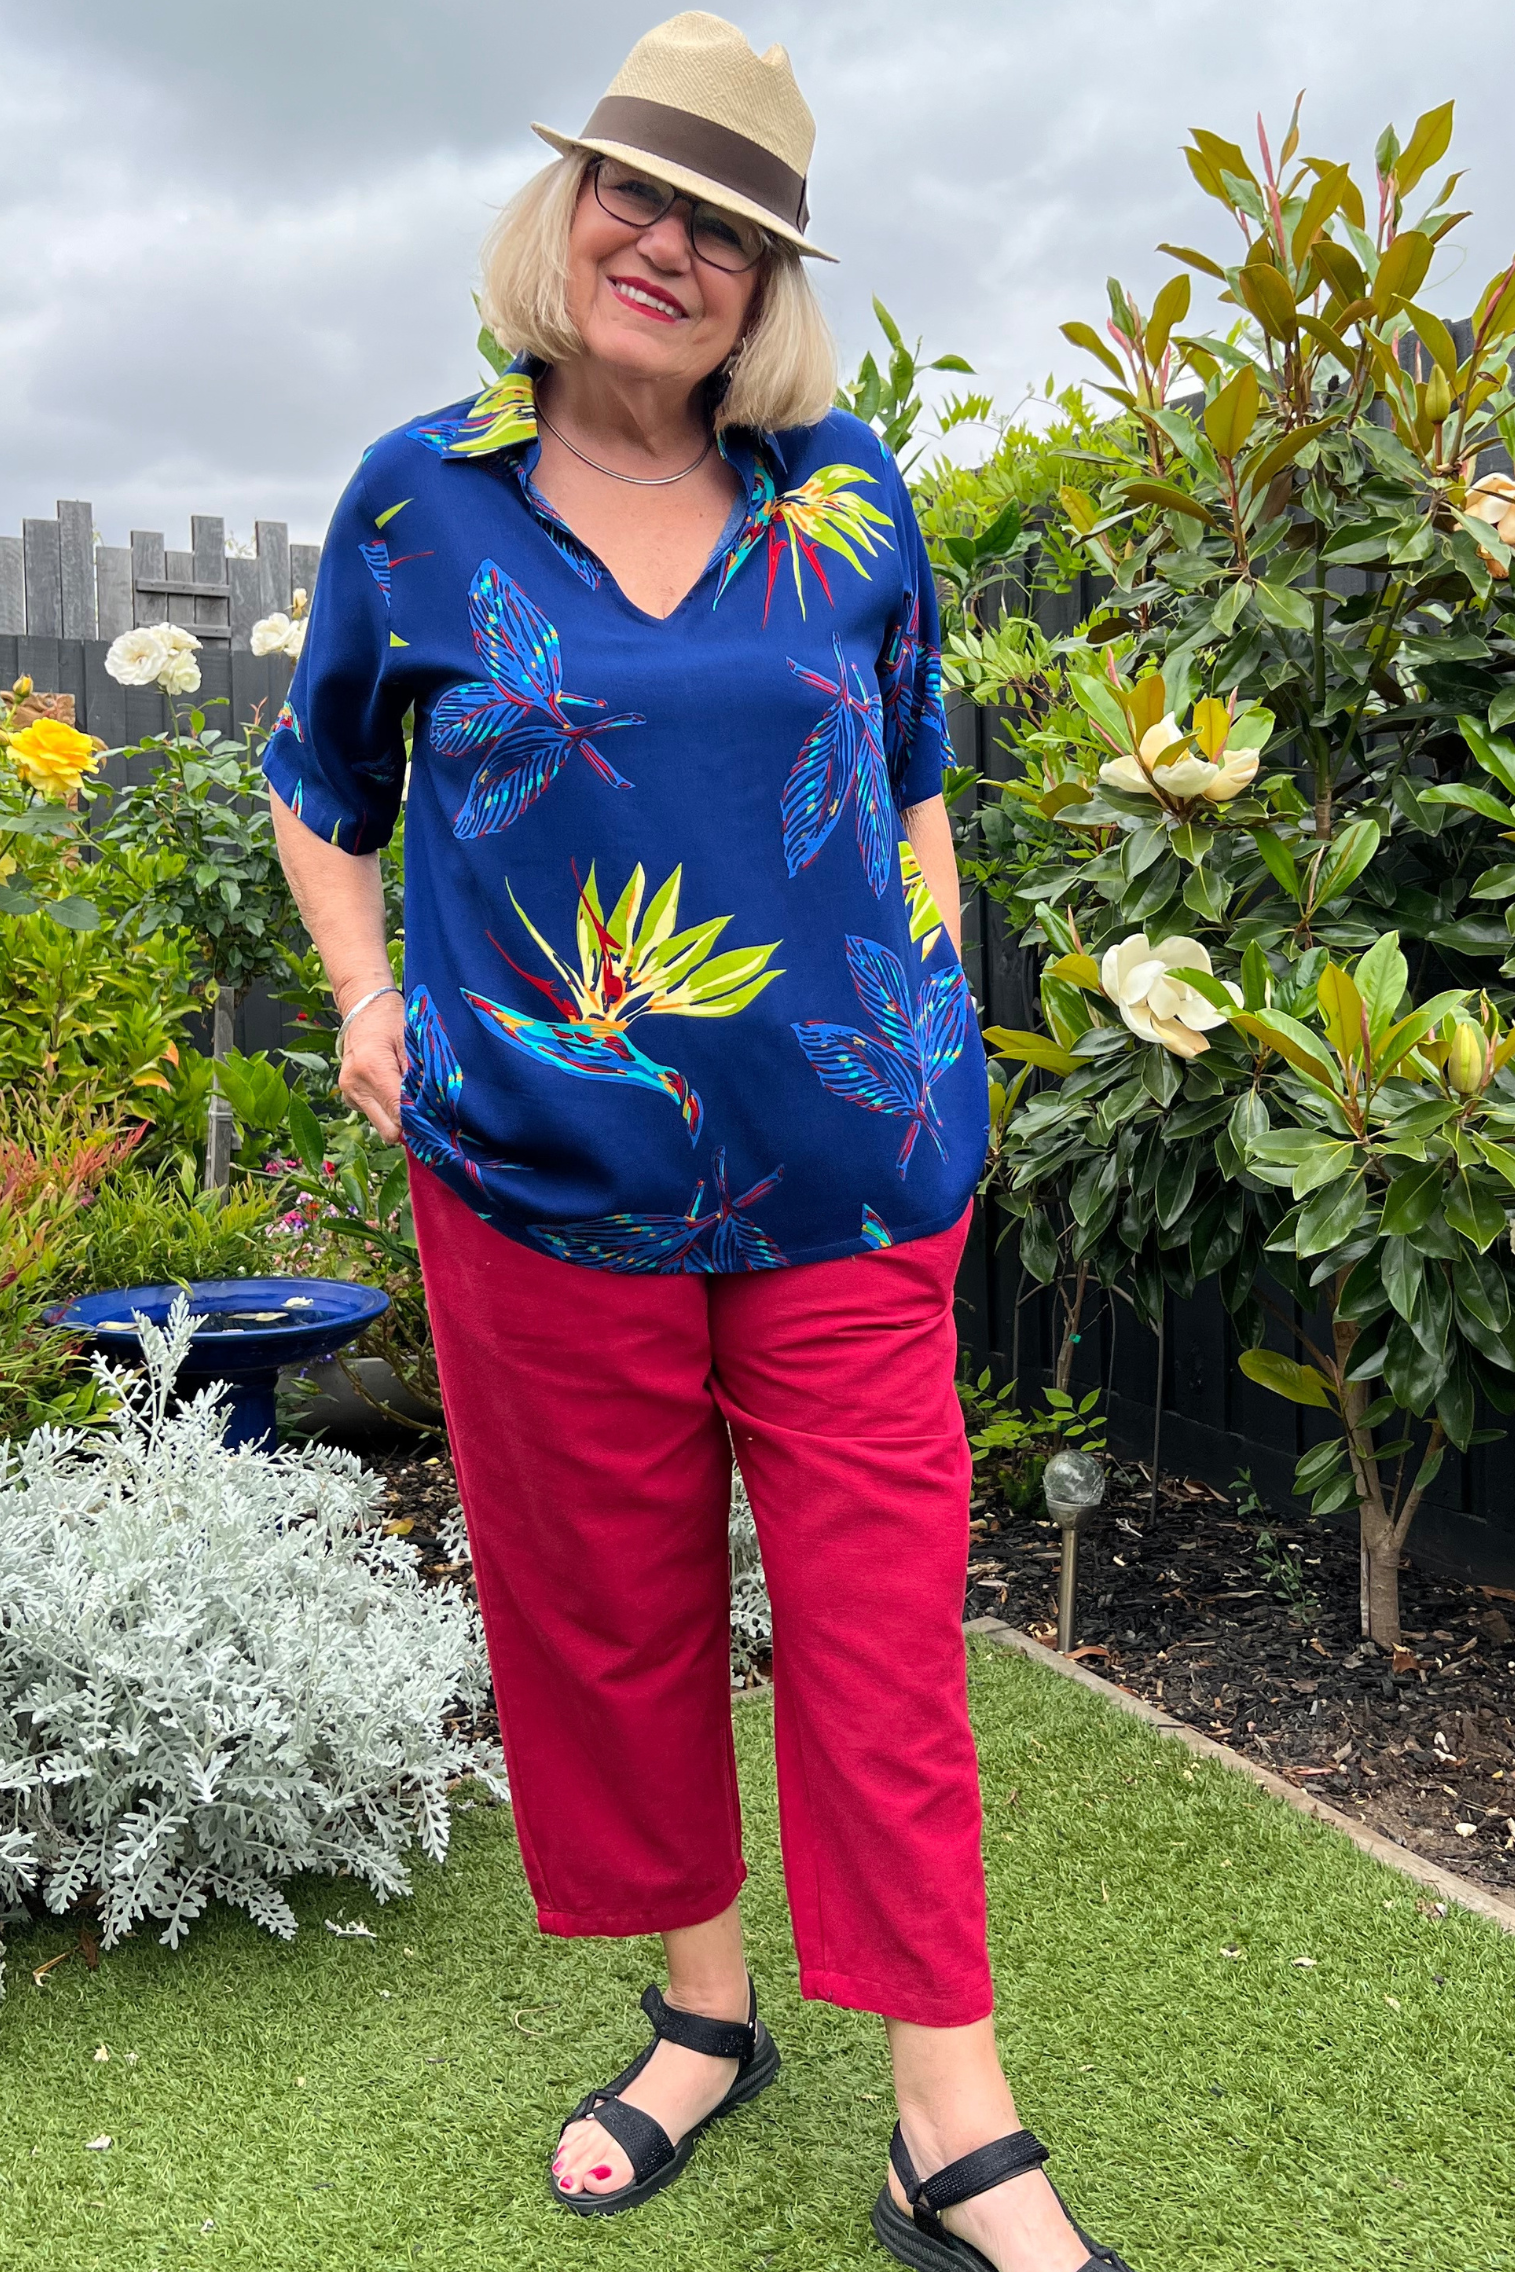 Kita Ku modelling a tropical paradise printed top Rebecca over red pant port in a garden setting.